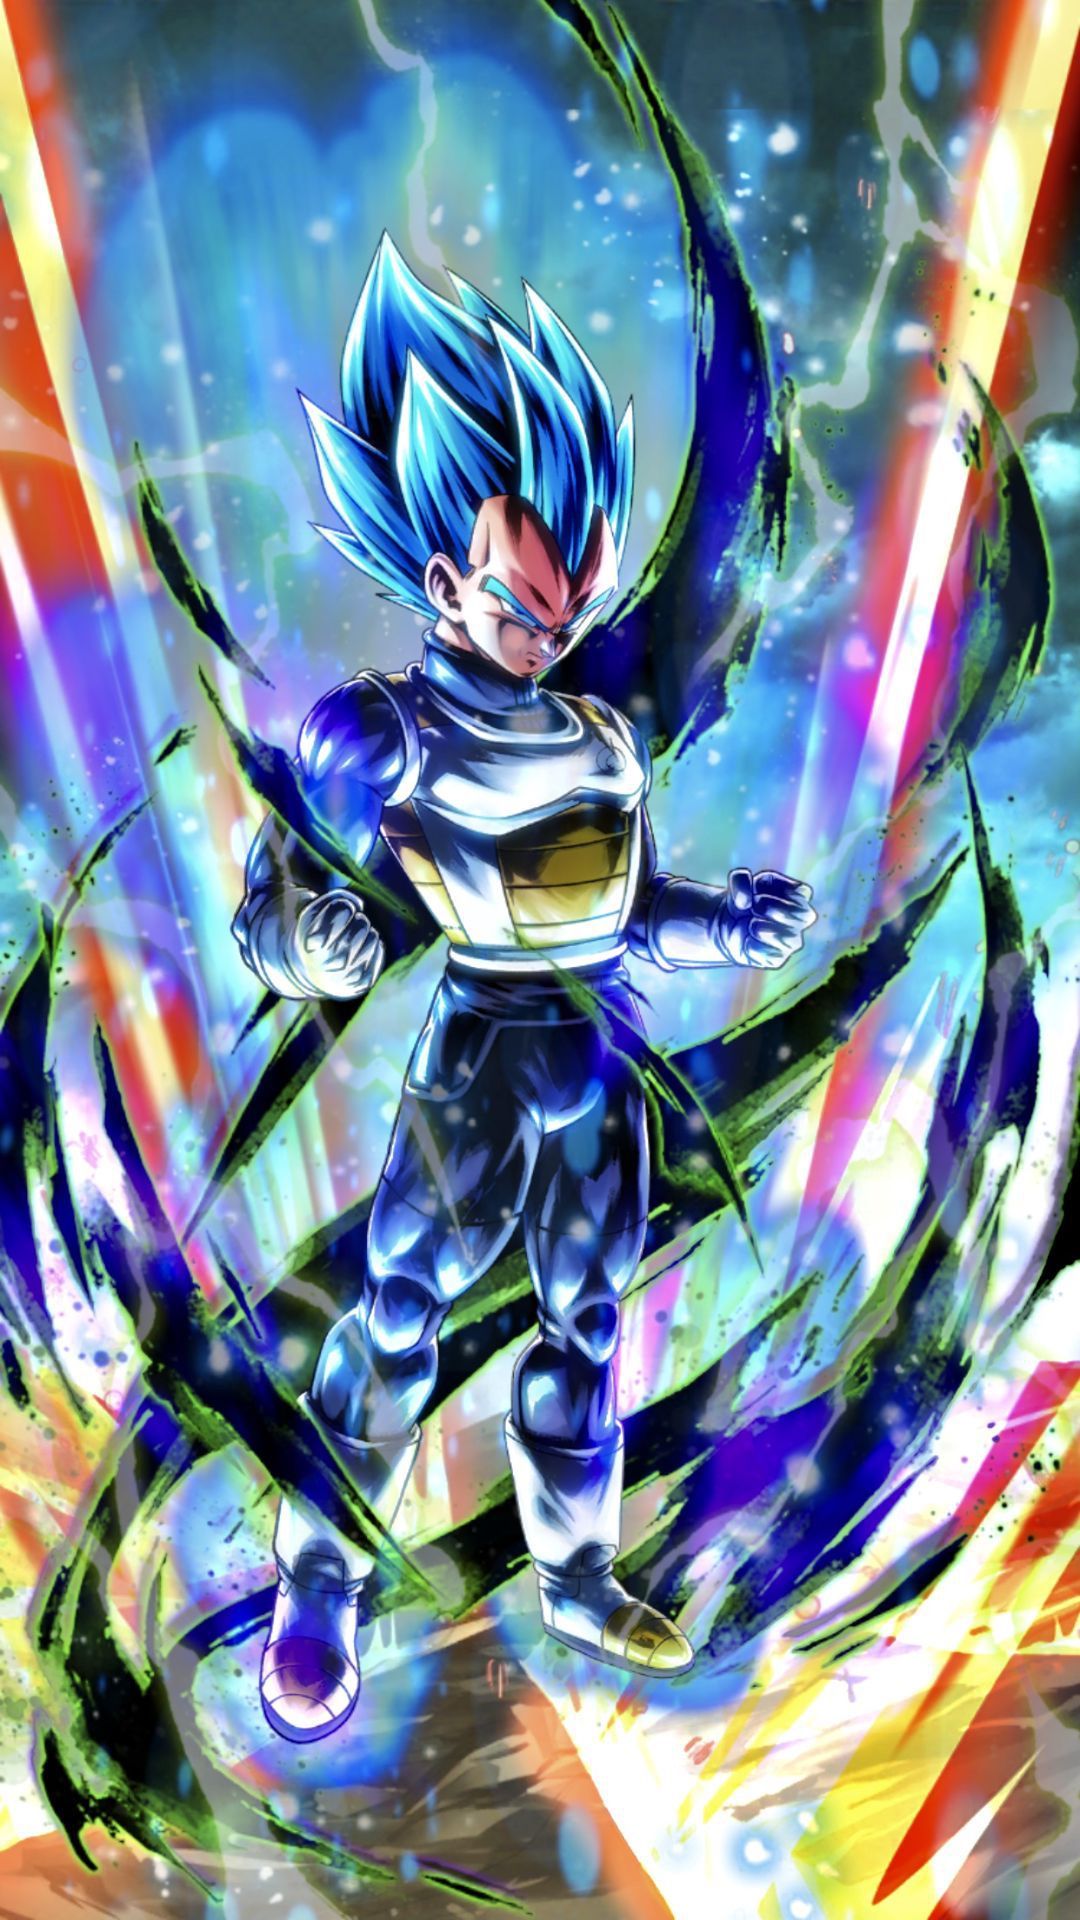 I May Be A Hero, But I Think These Villains Can Change!: Son Y N Or Goku Jr. In 2021. Dragon Ball Super Artwork, Dragon Ball Wallpaper, Dragon Ball Wallpaper Iphone